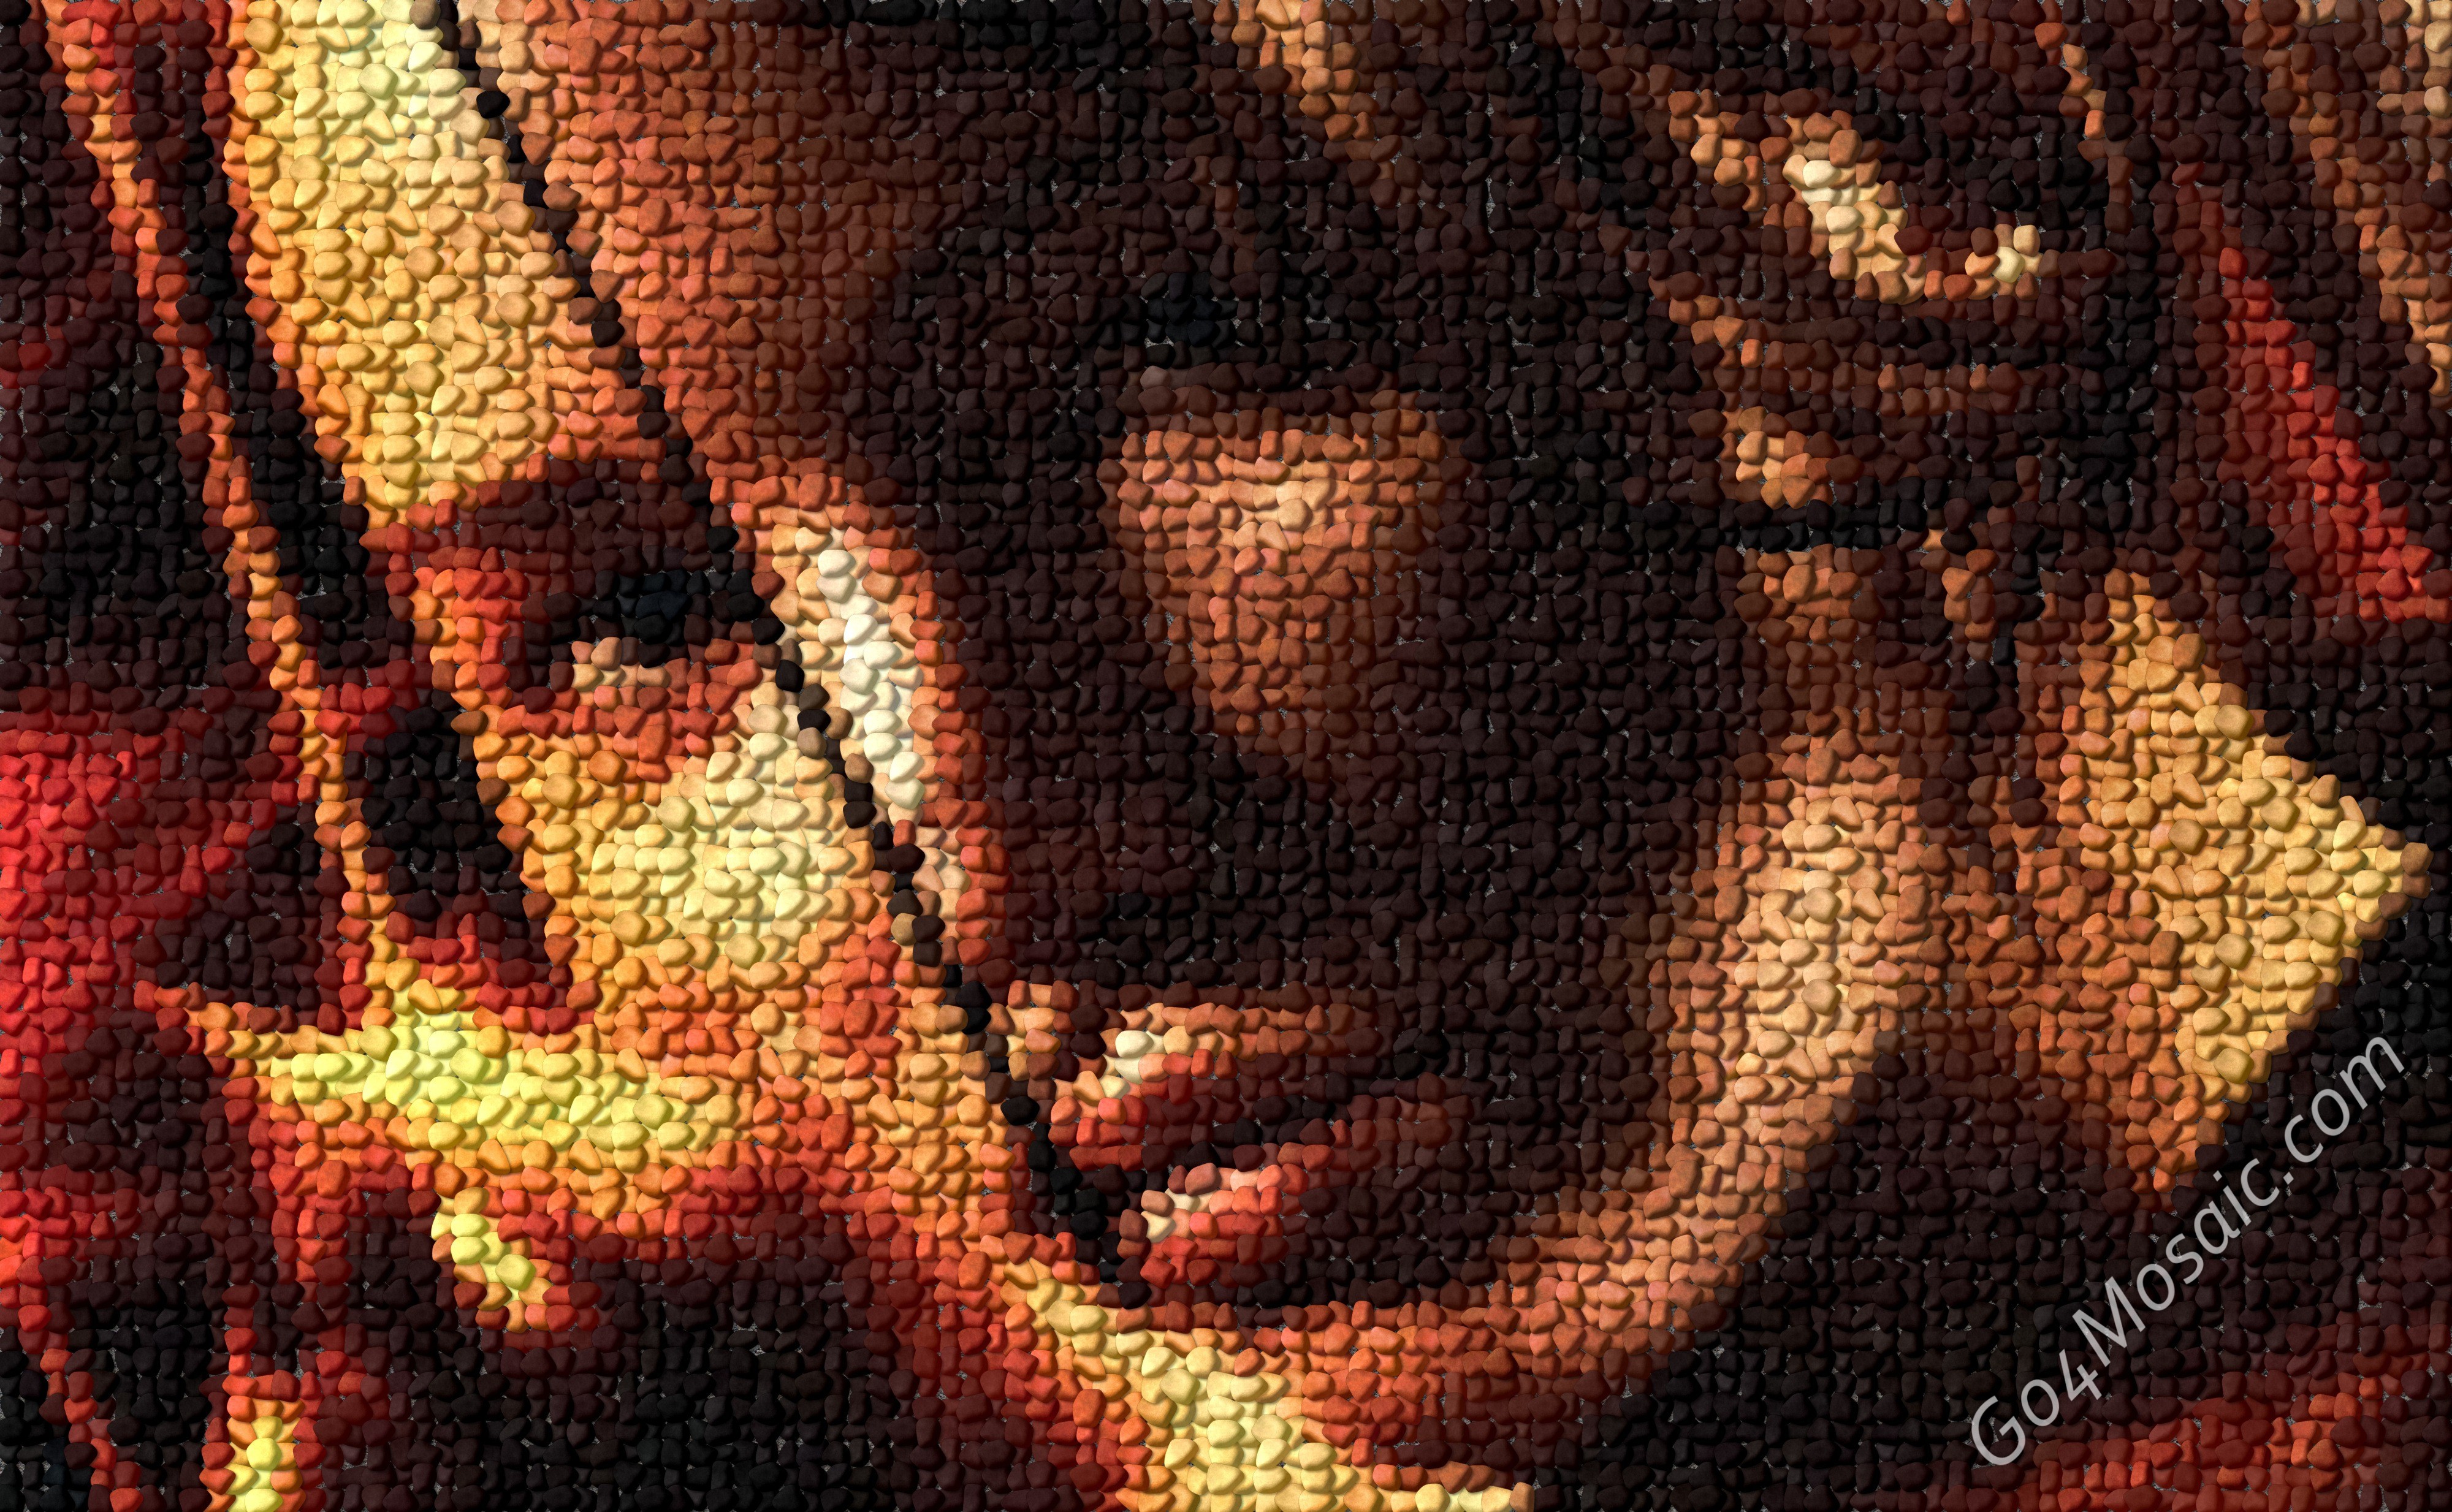 The Hunger Games mosaic from Pebbles